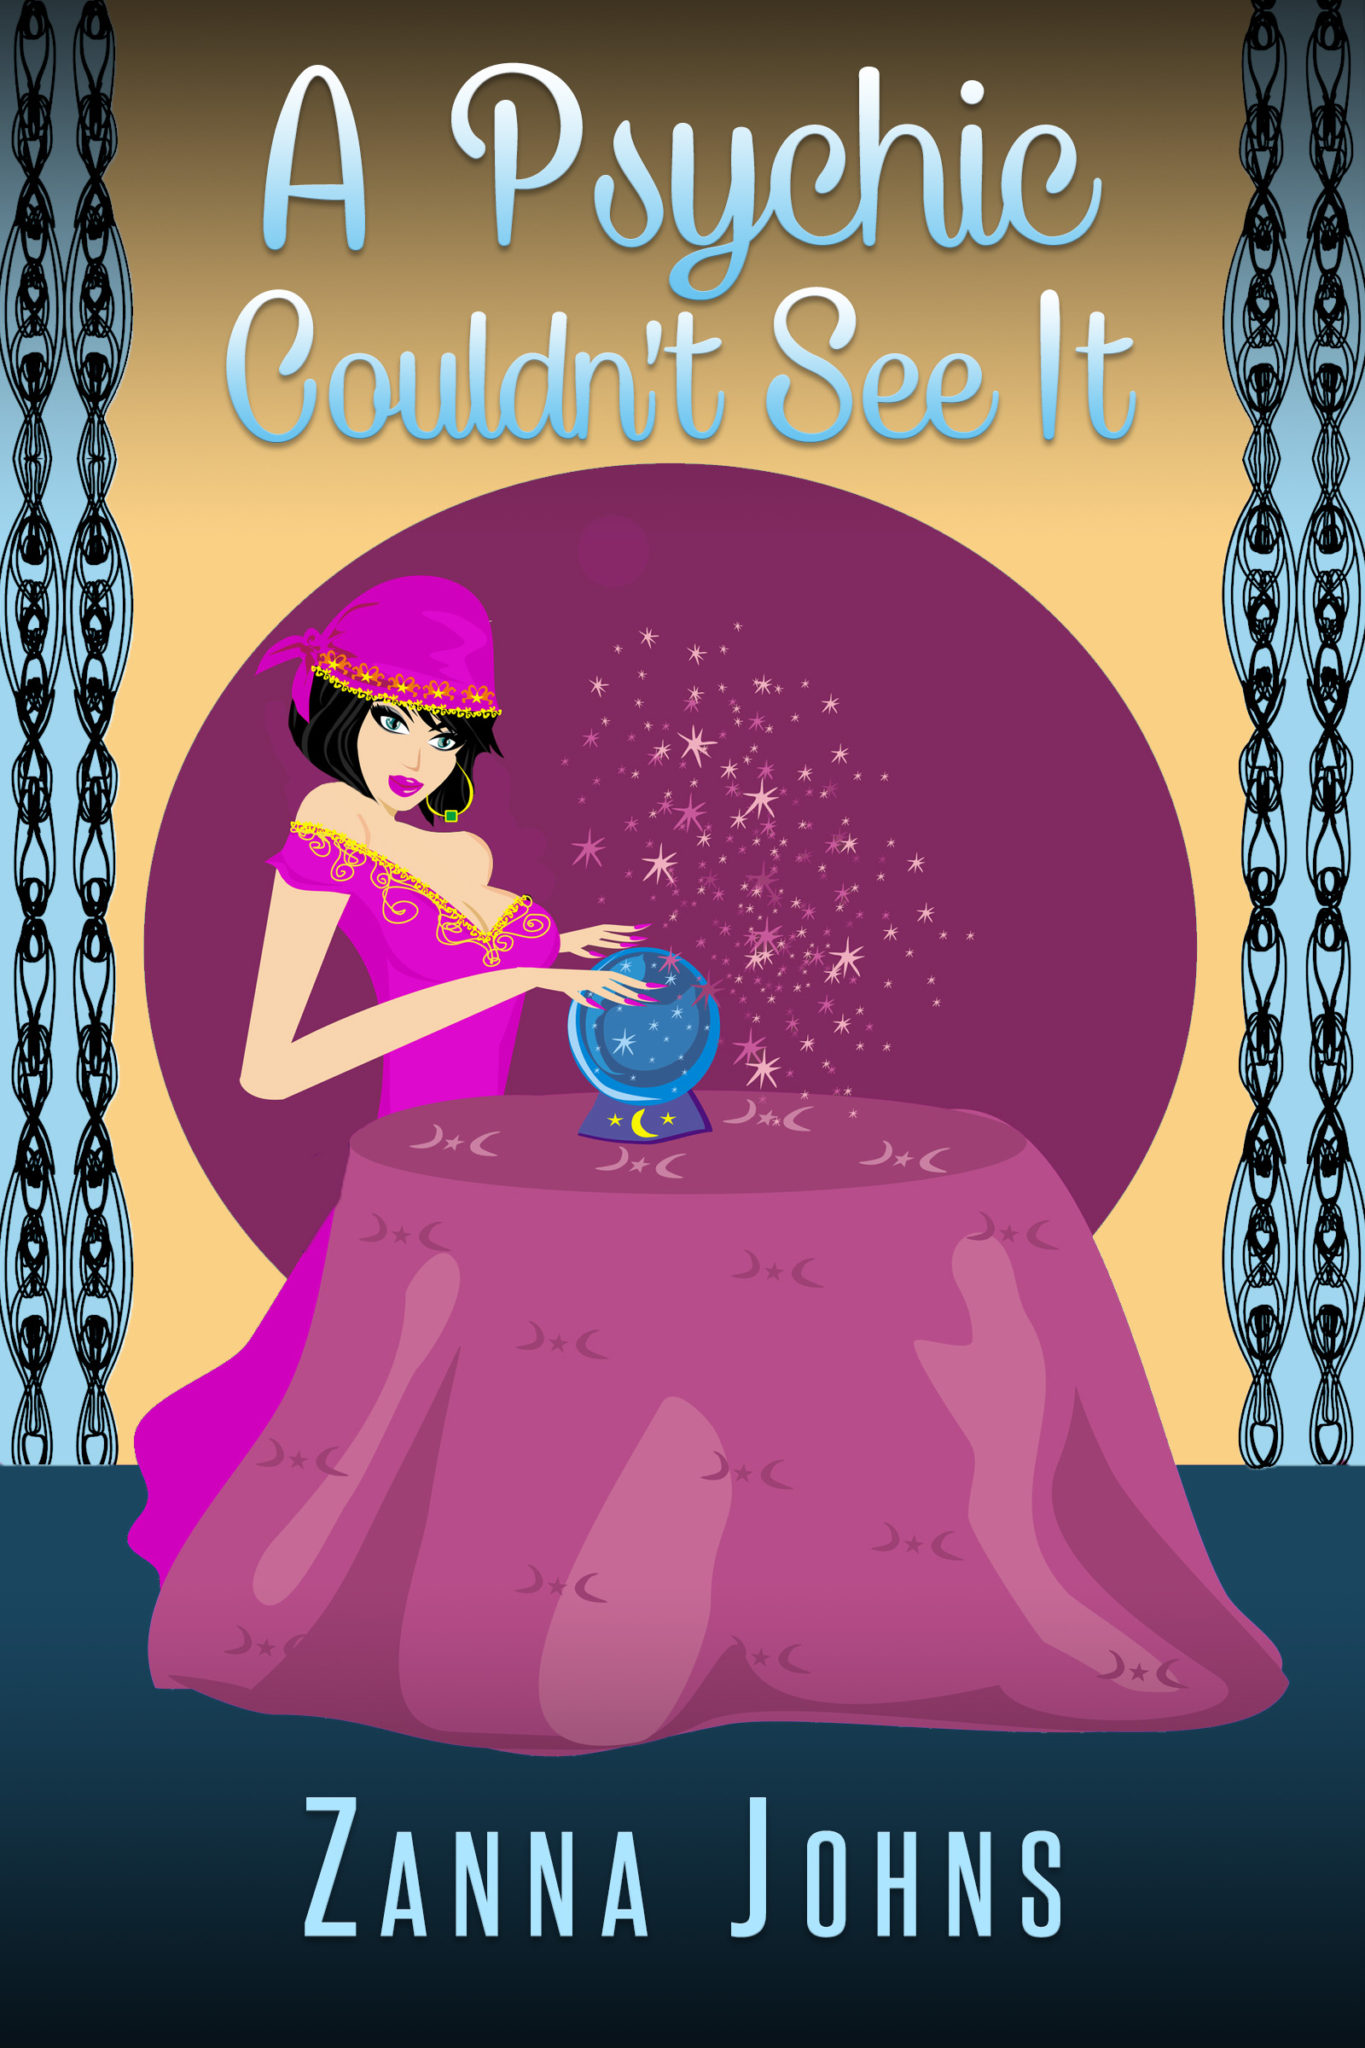 FREE: A Psychic Couldn’t See It by Zanna Johns